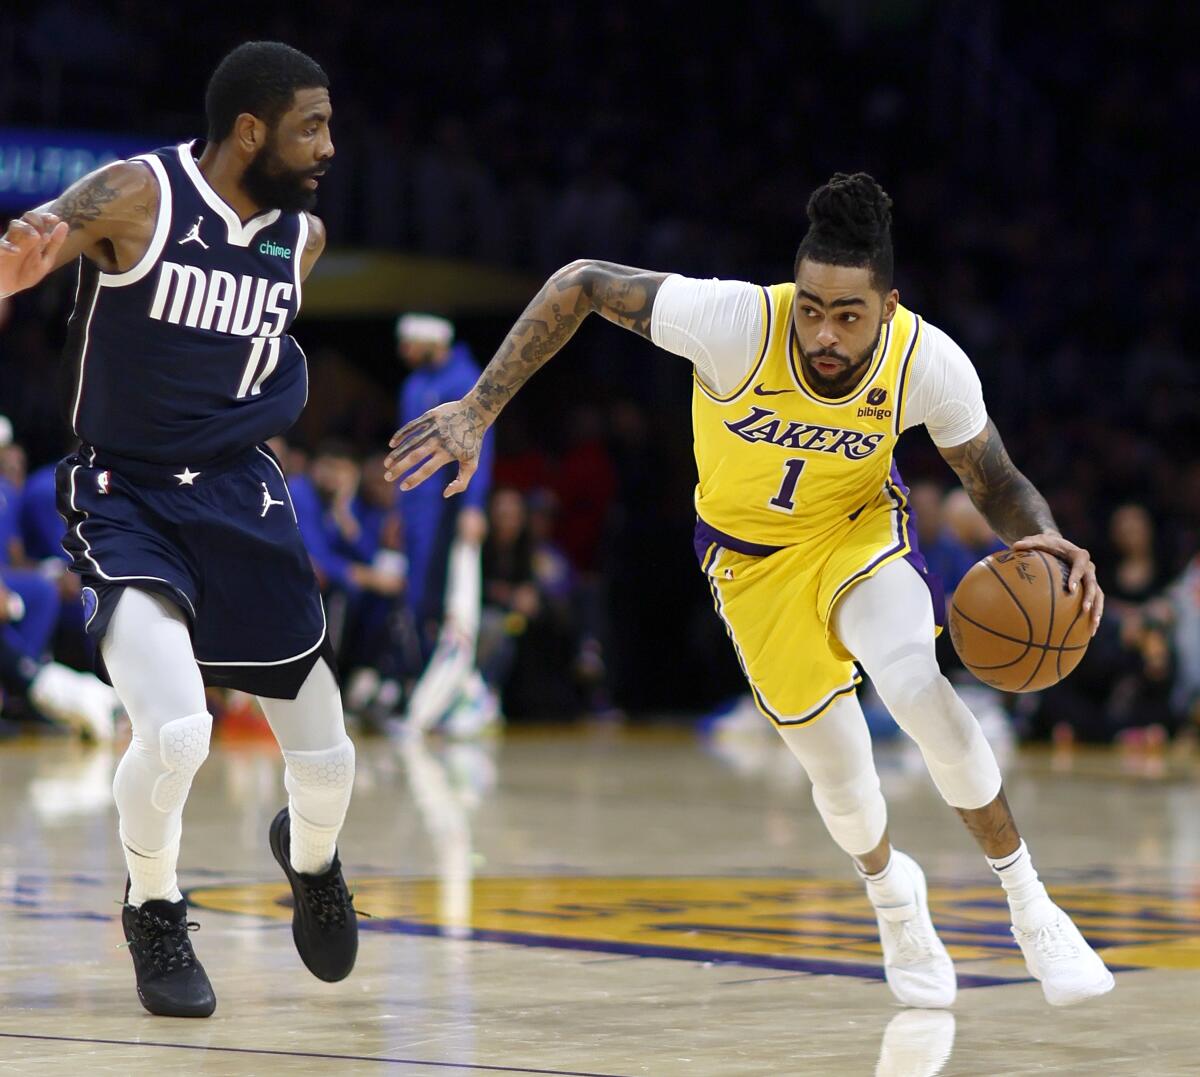 D'Angelo Russell drives against Kyrie Irving.